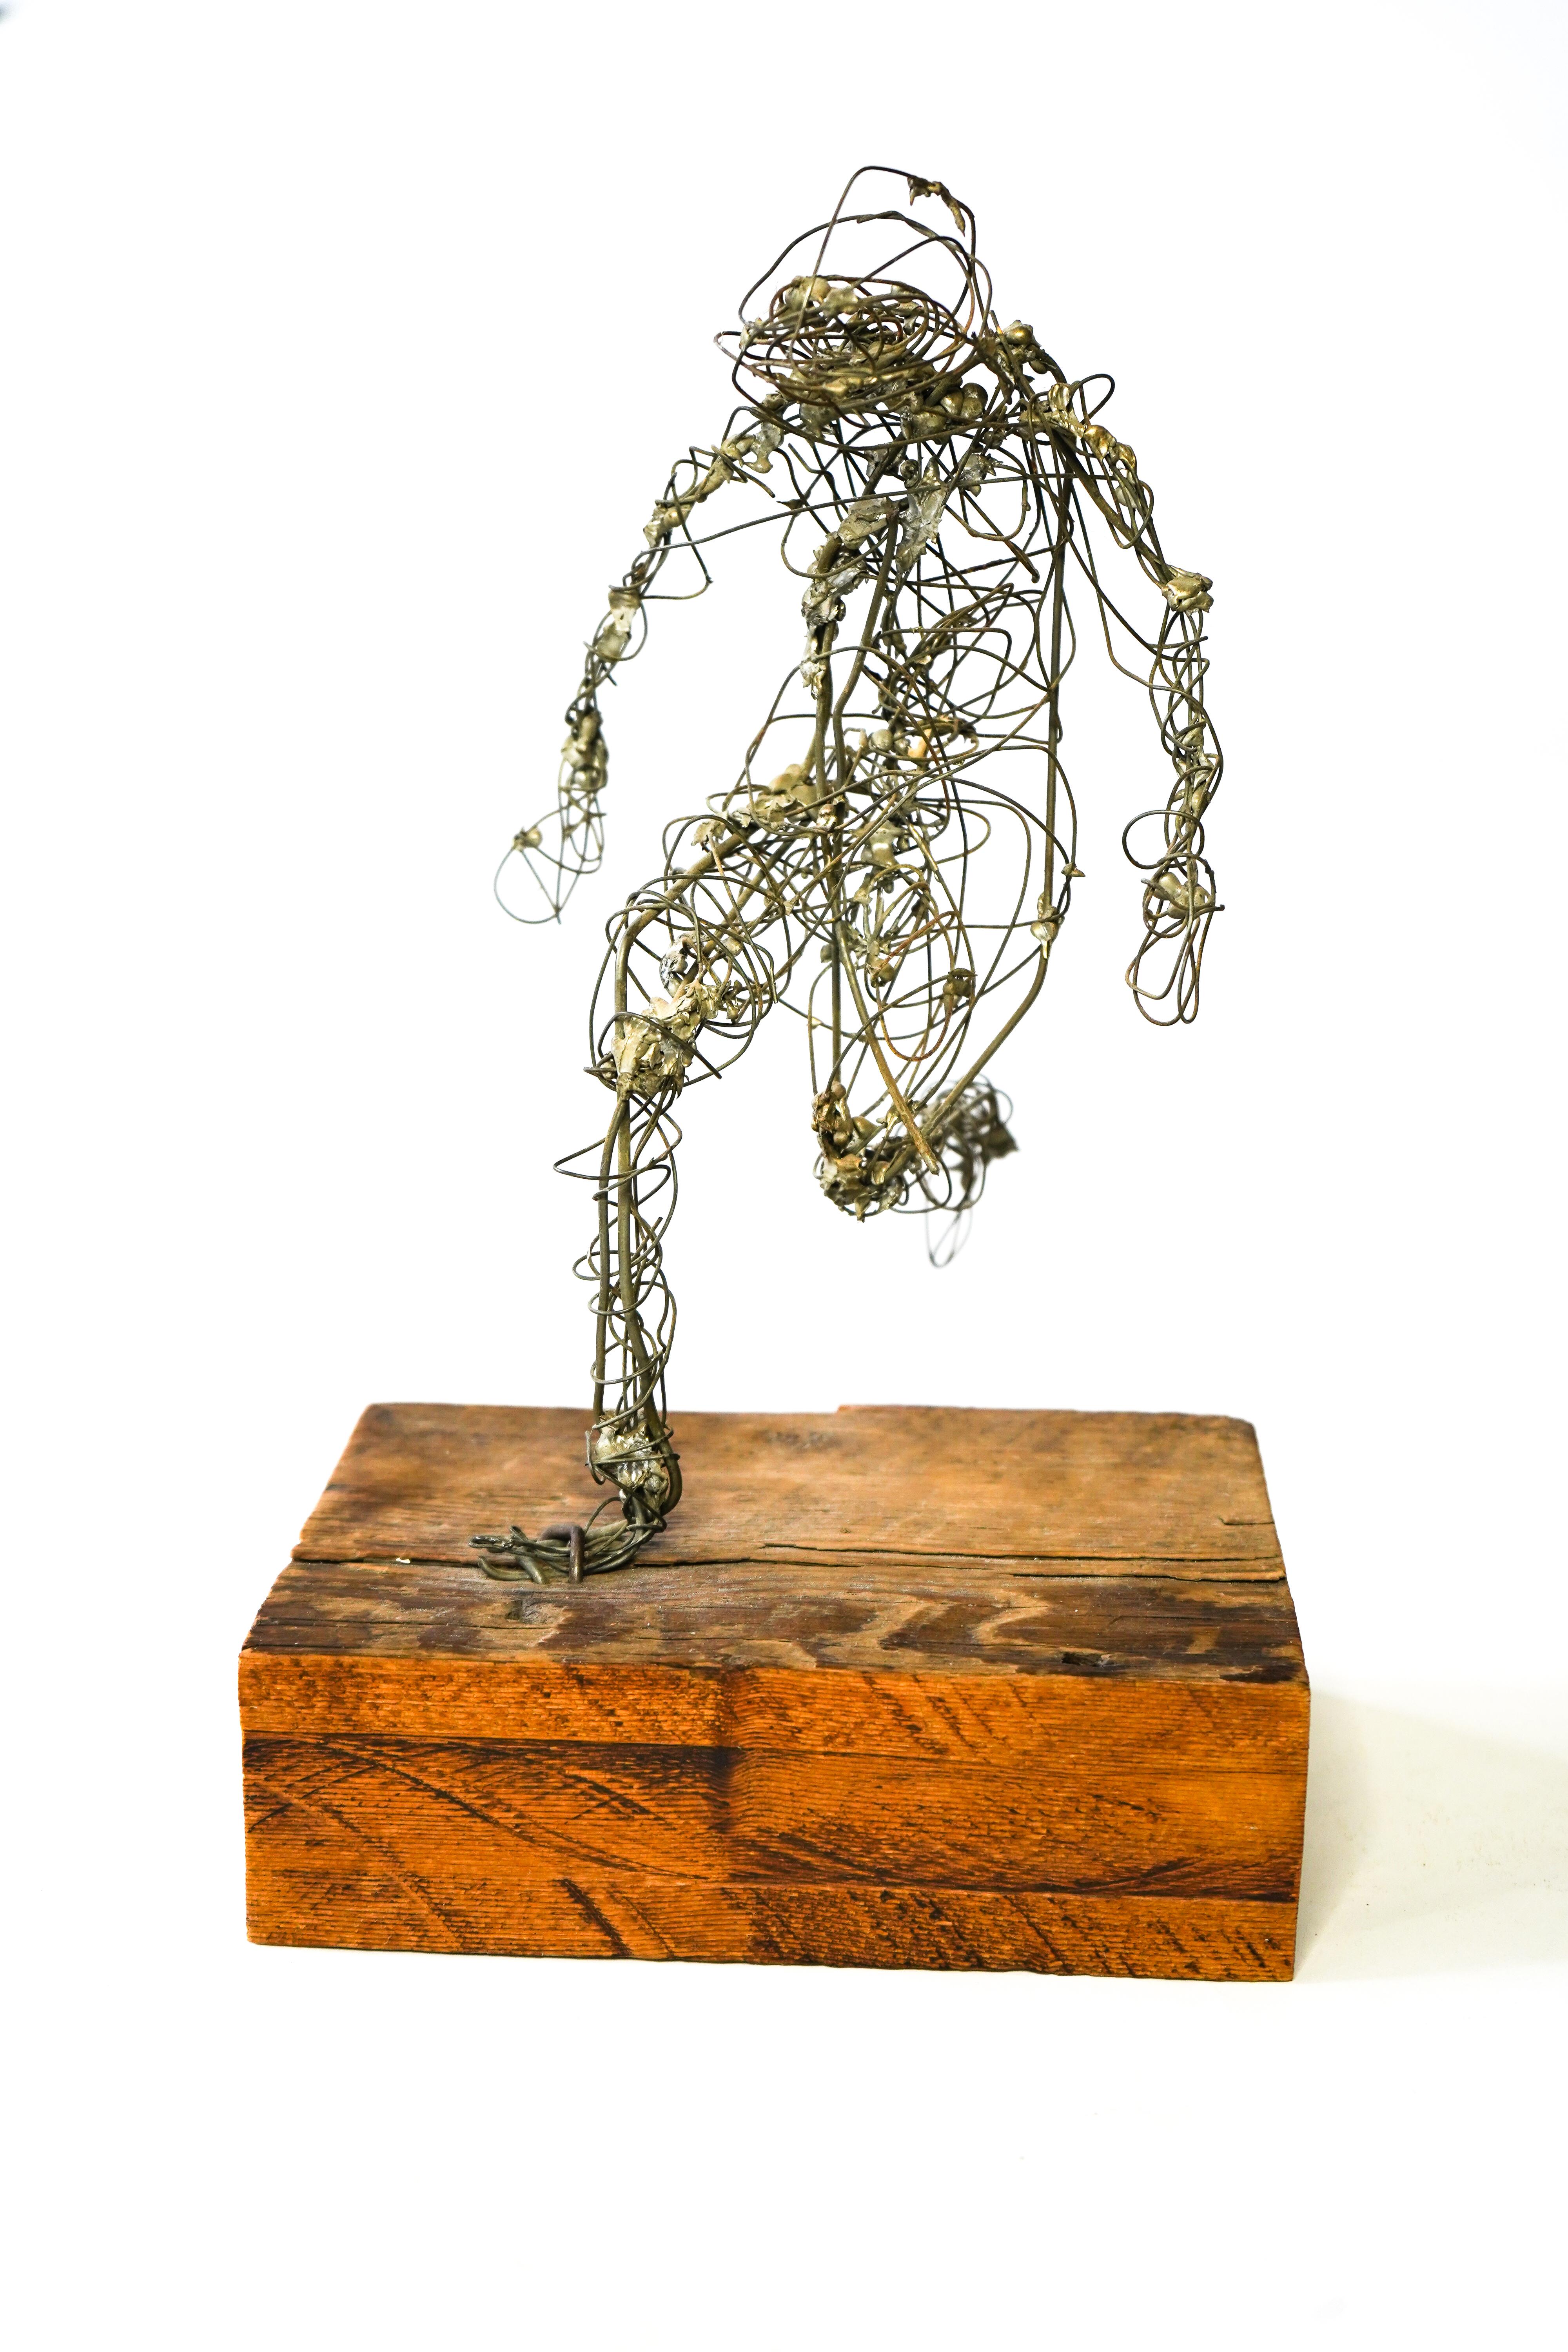 Frances Venardos Gialamas Abstract Wire Figure In Motion Sculpture For Sale 2